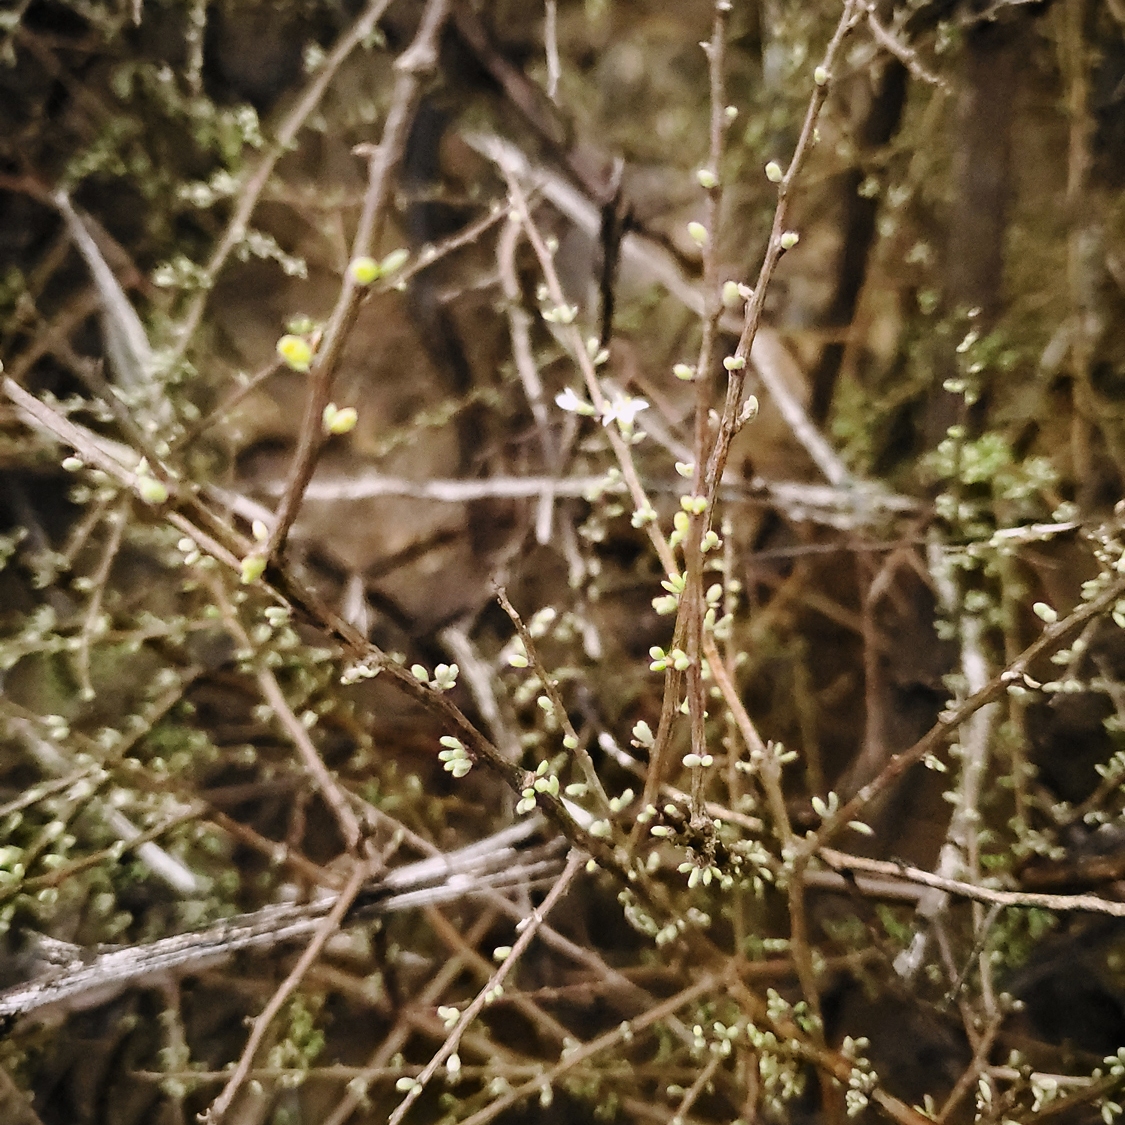 Sparse leaves on a California boxthorn